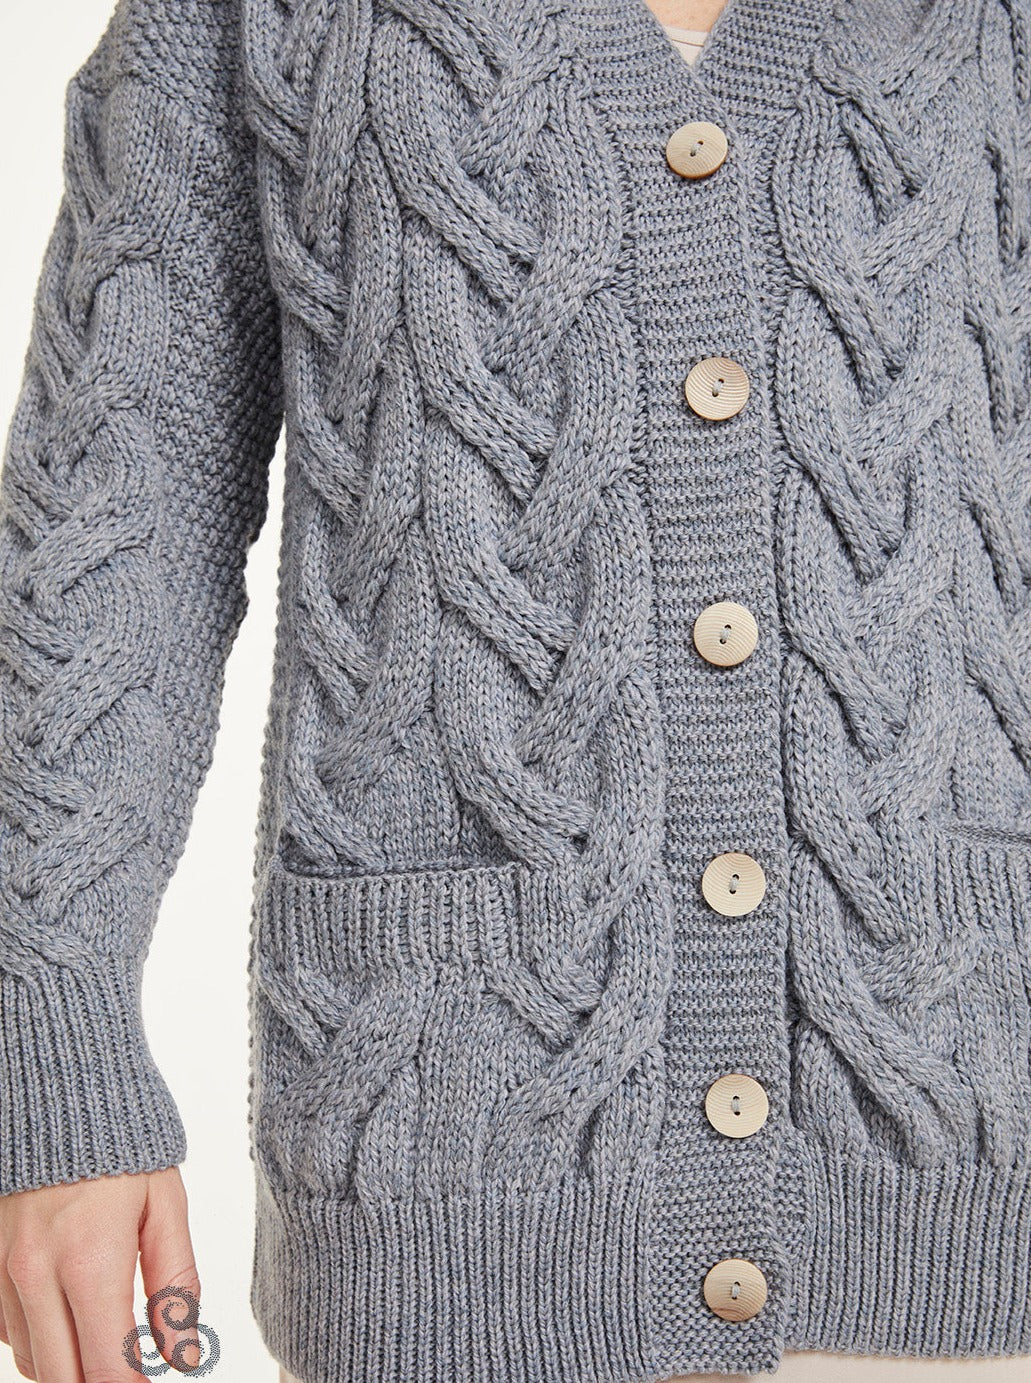 Aran - V-neck Cable Cardigan with Buttons - Ocean grey